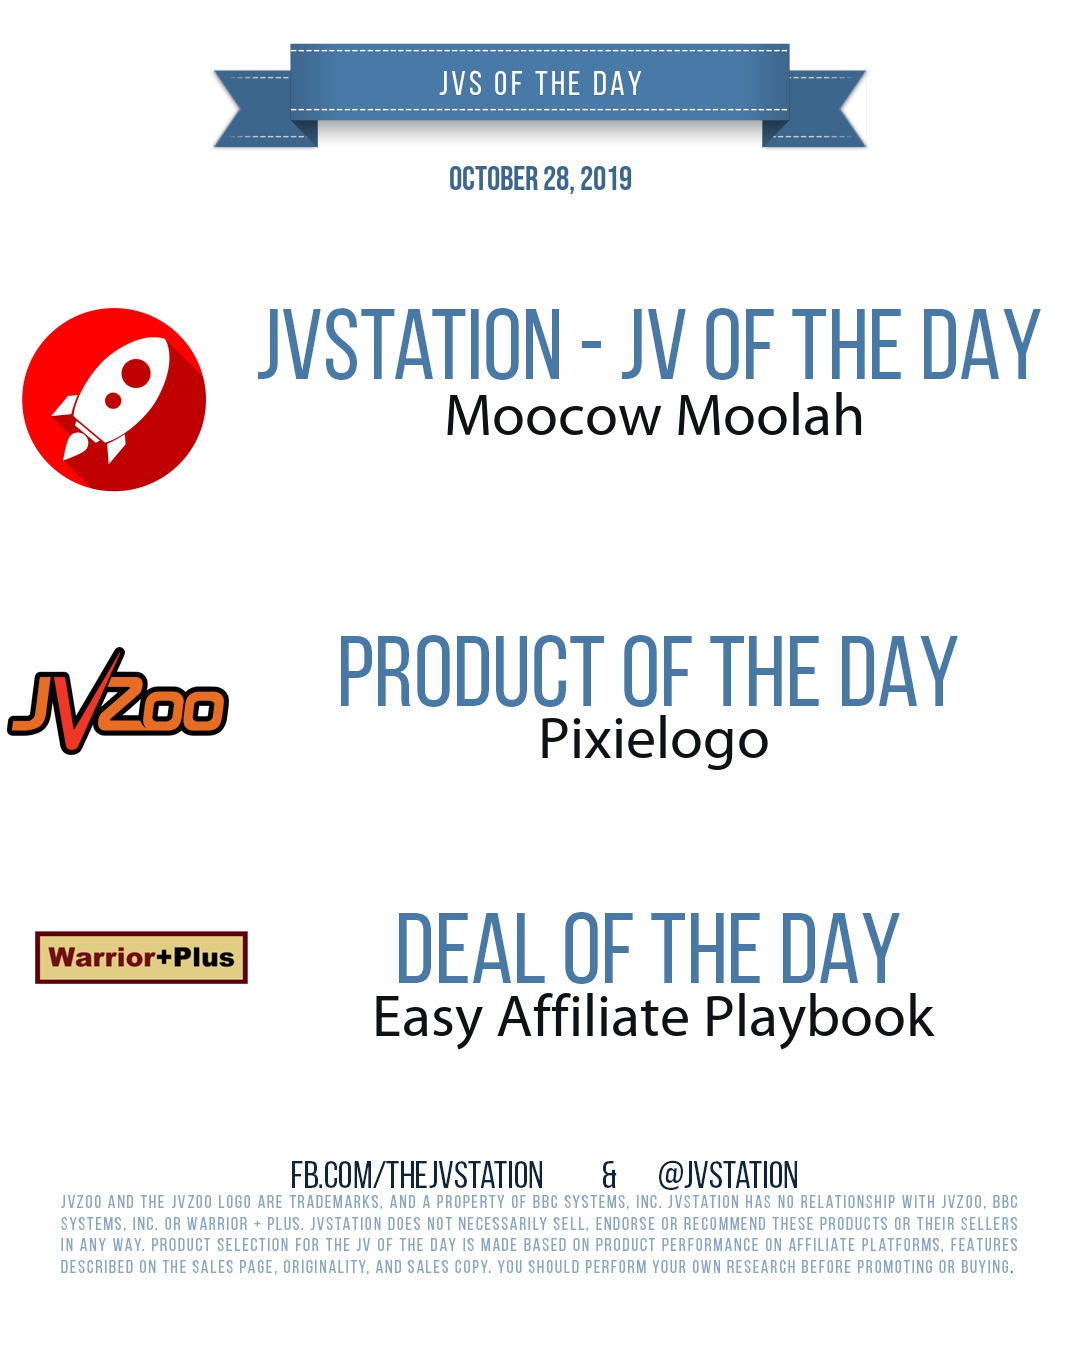 JVs of the day - October 28, 2019